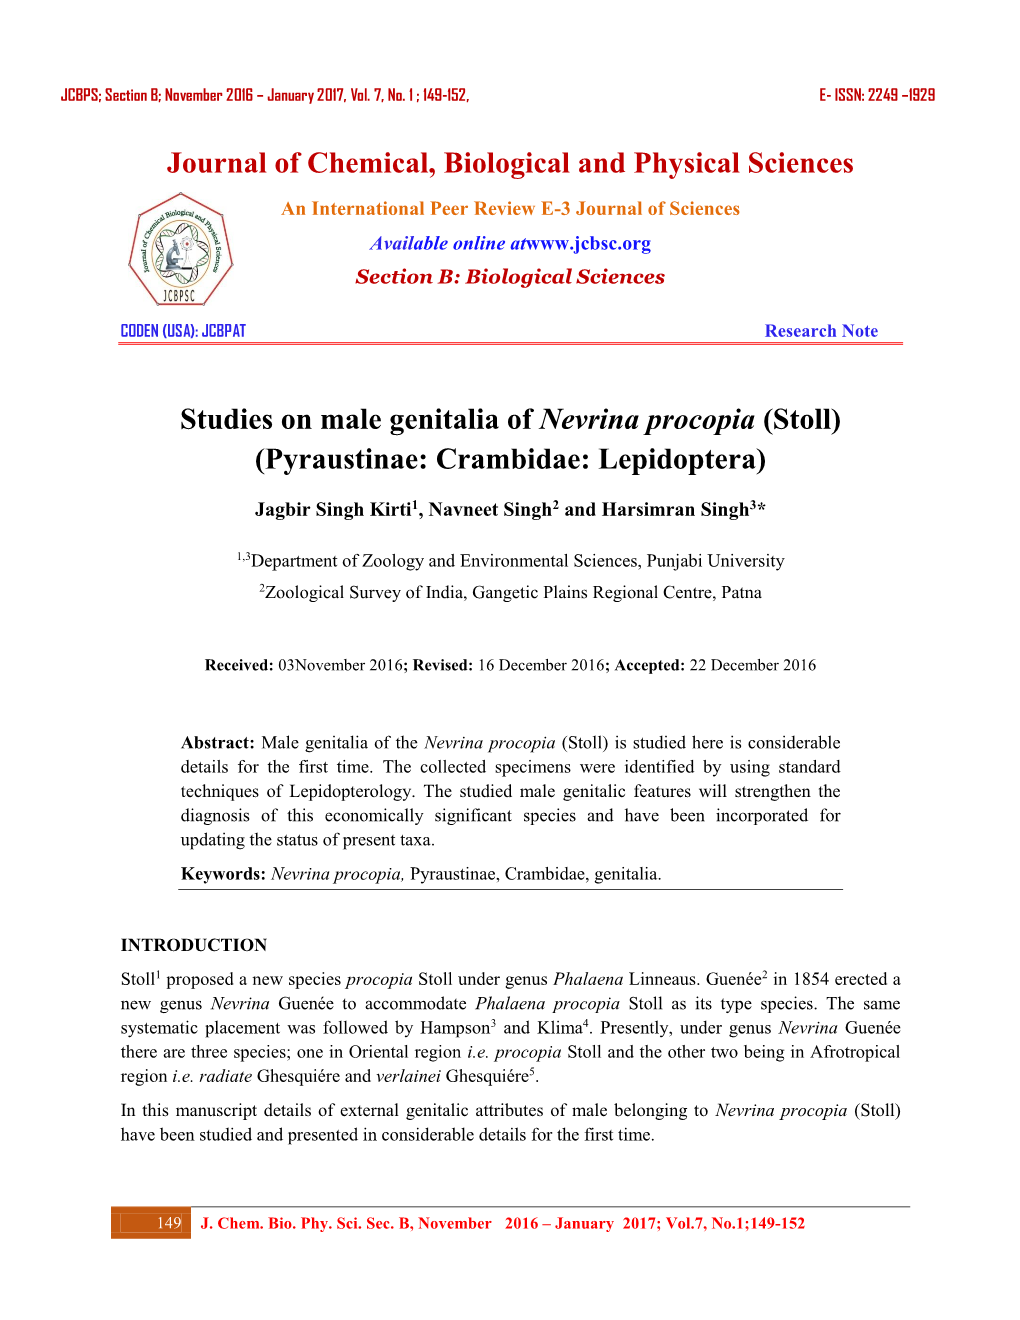 Journal of Chemical, Biological and Physical Sciences Studies on Male